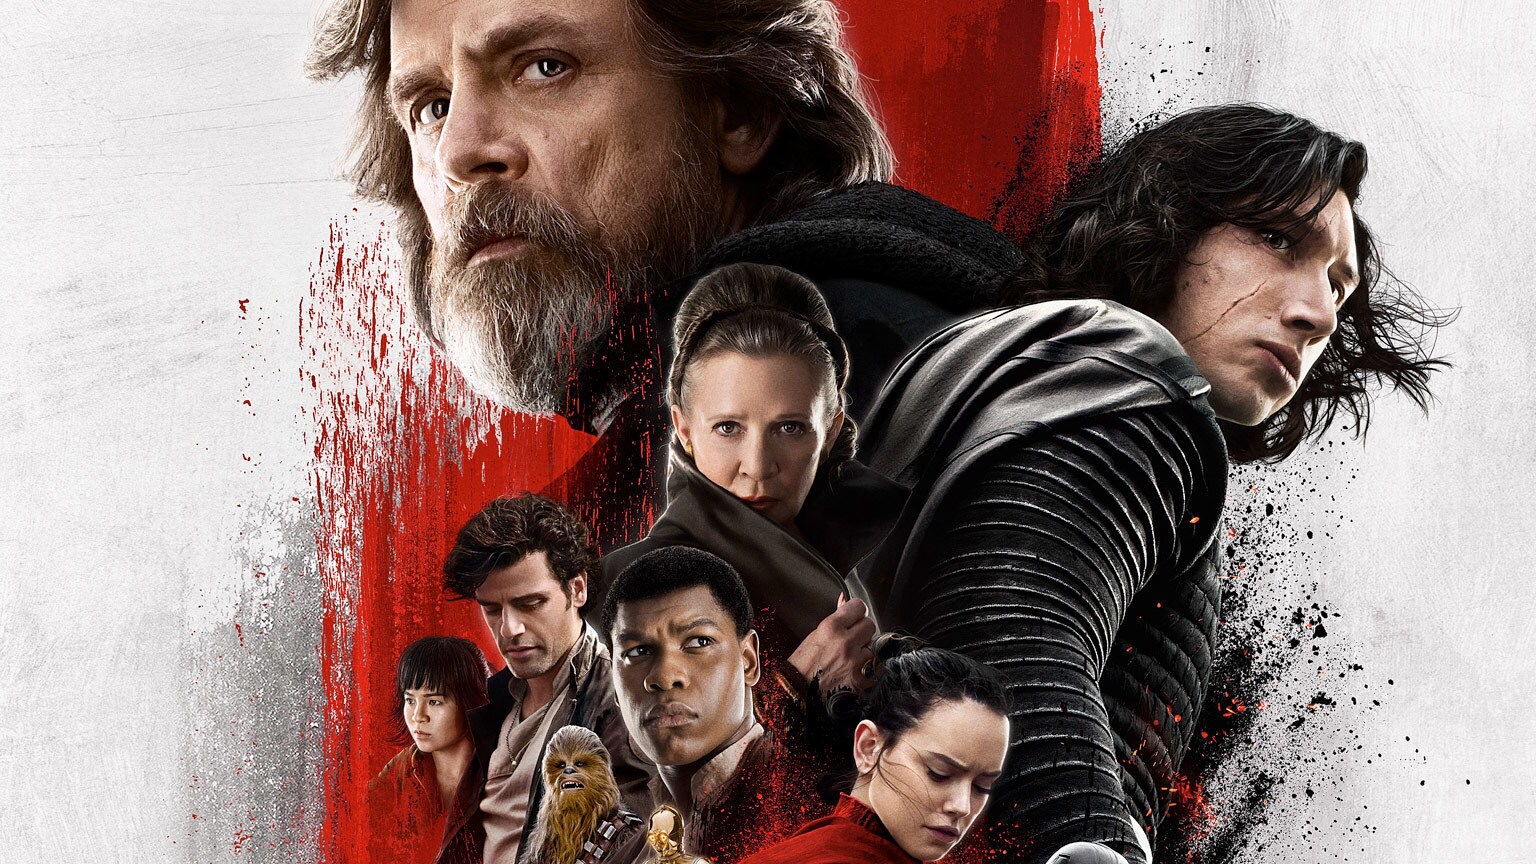 Check Out the Beautiful Star Wars: The Last Jedi IMAX Poster